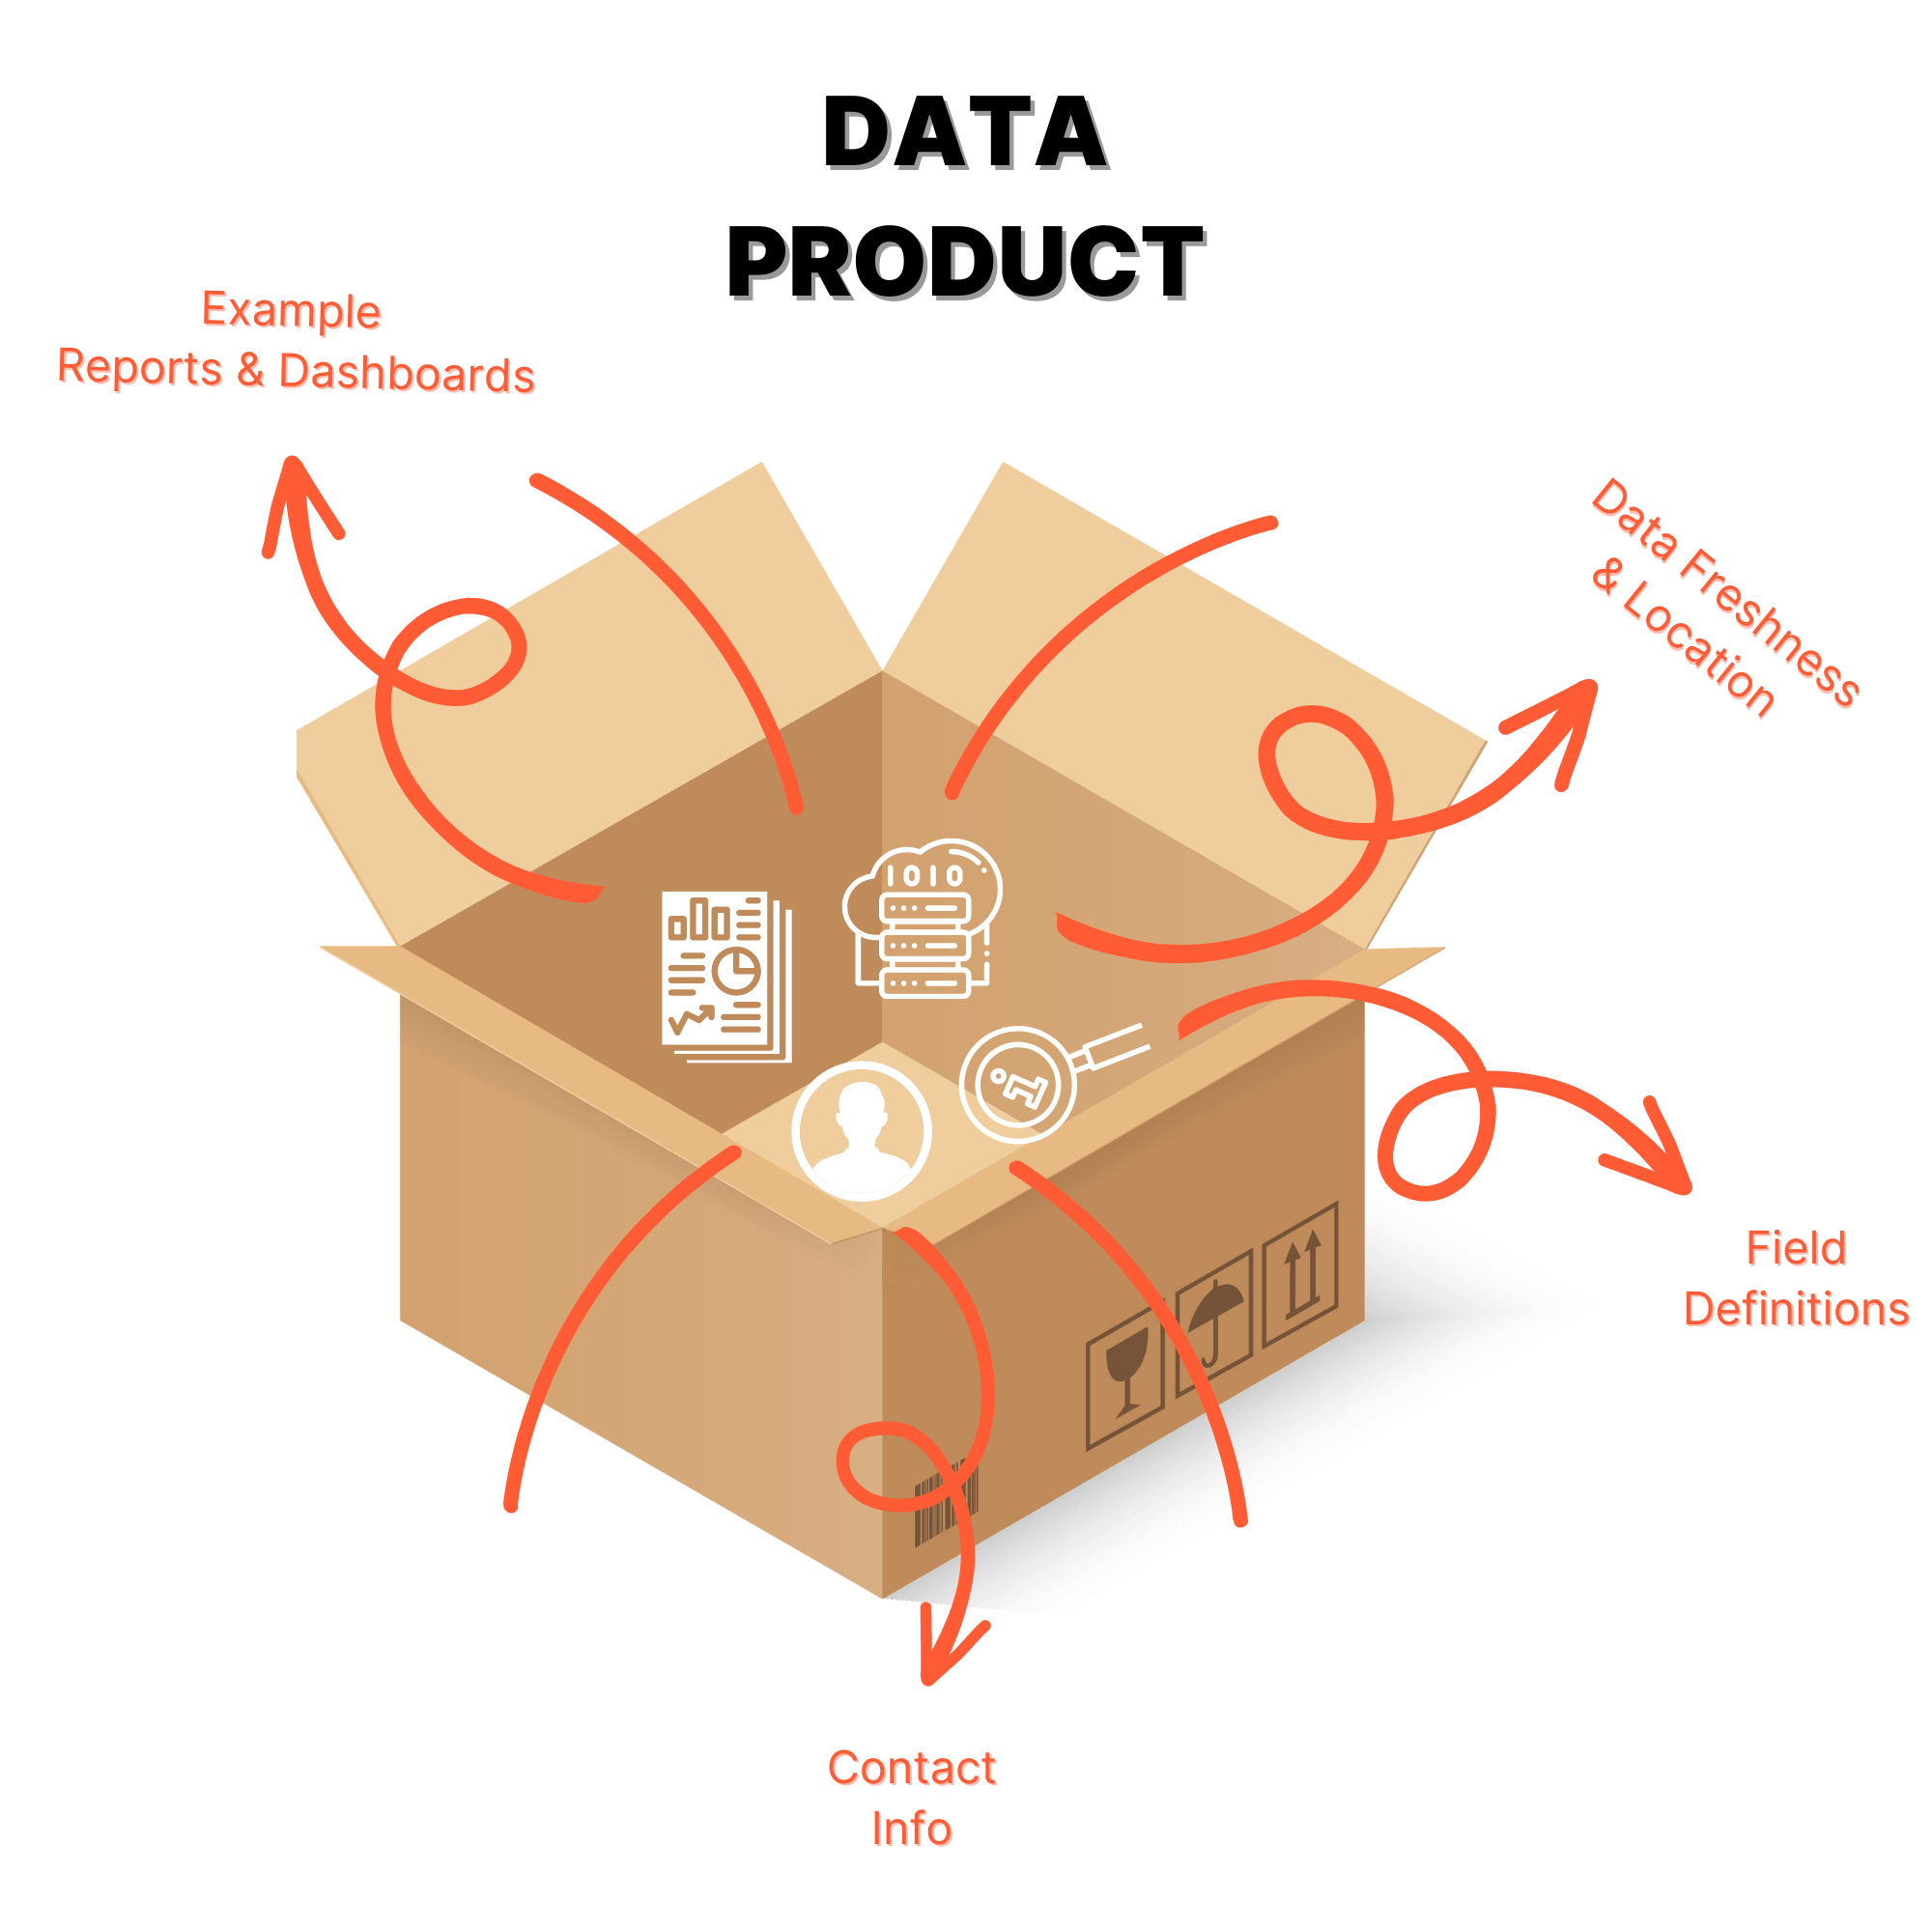 Brown cardboard box opened with four white graphics inside and orange arrows coming out of the box pointing to the text: A data product includes example reports and dashboards, data freshness and location, field definitions, contact information.